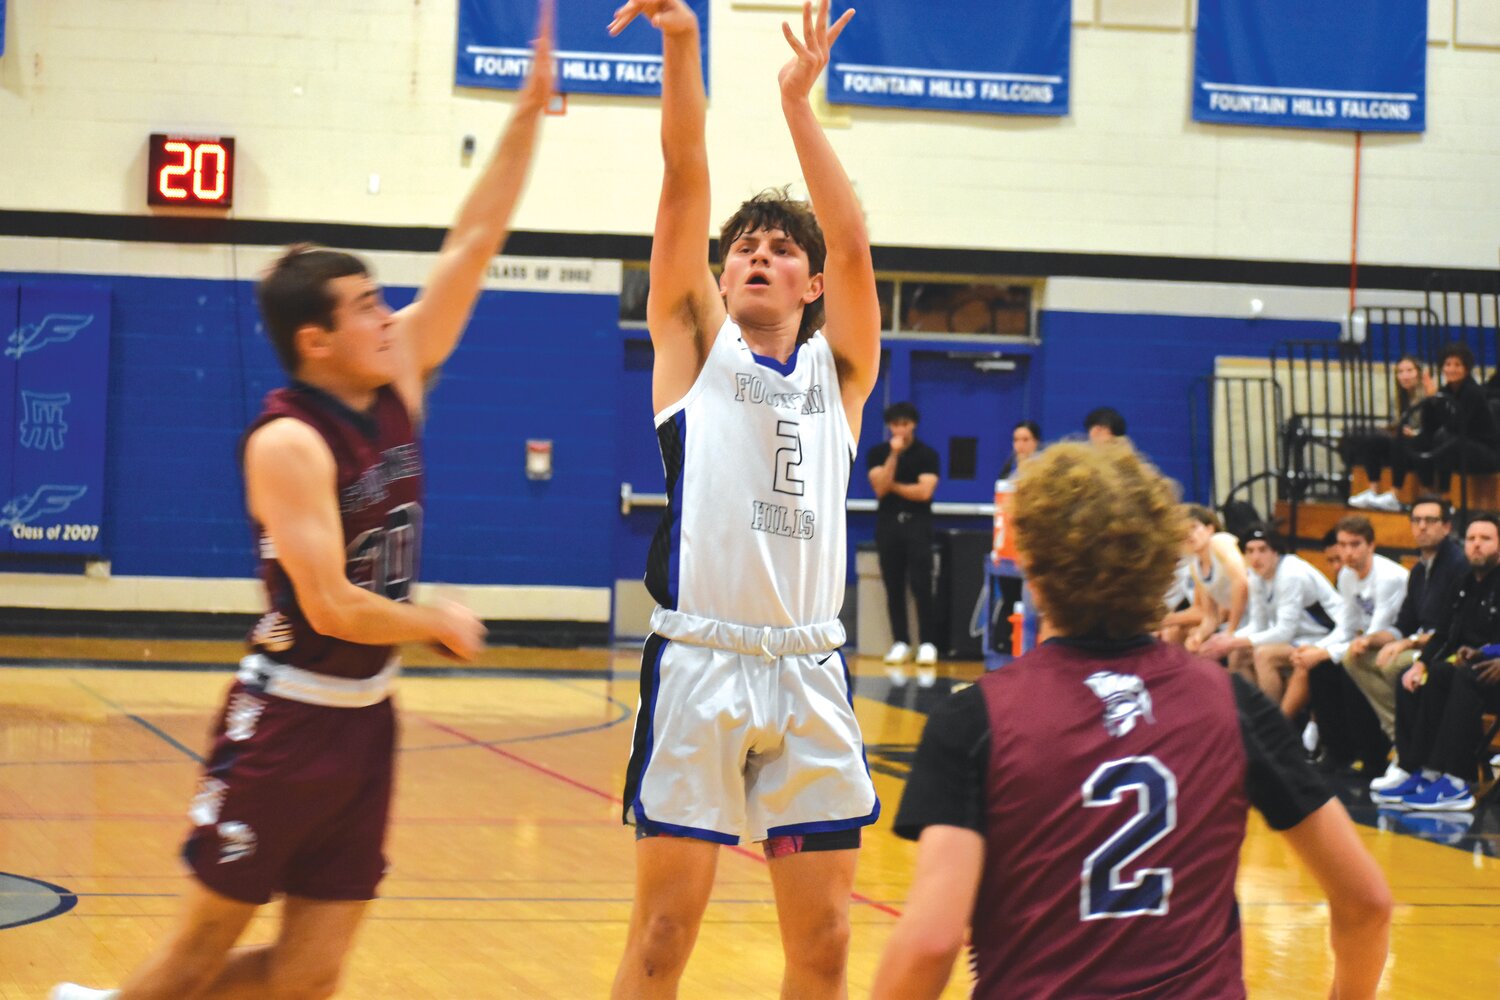 Junior Michael Fitzherbert averaged five points per game through the first four games but scored 15 points against Northland Prep Academy. (Independent Newsmedia/George Zeliff)